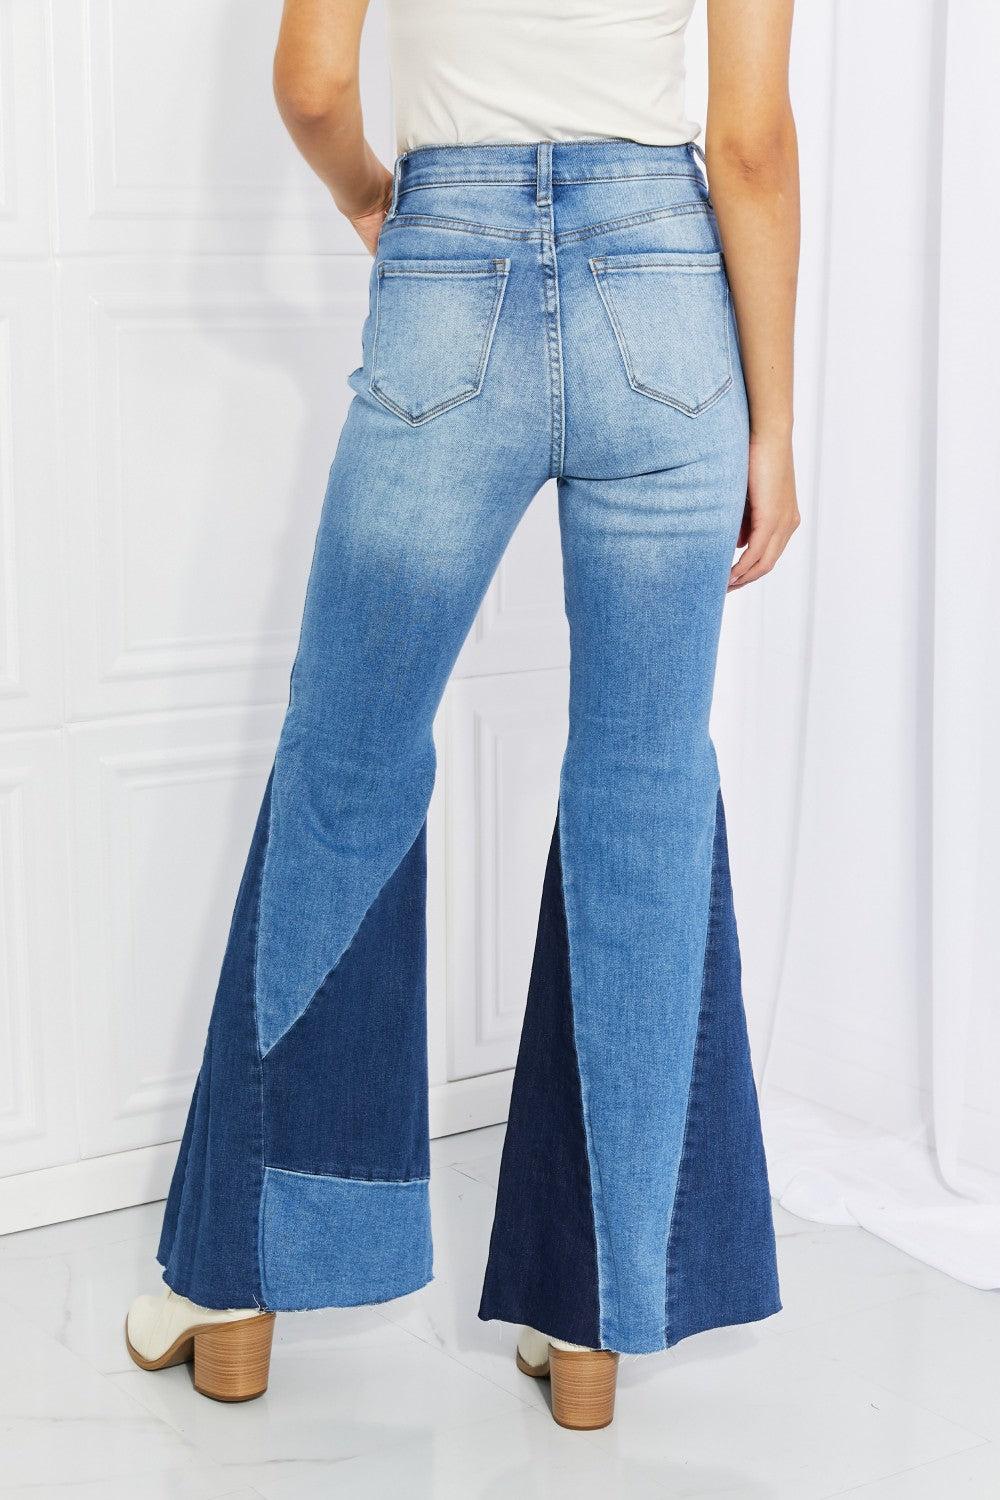 Vibrant Sienna Full Size Color Block Flare Jeans - ONLINE ONLY 2-10 DAY SHIPPING